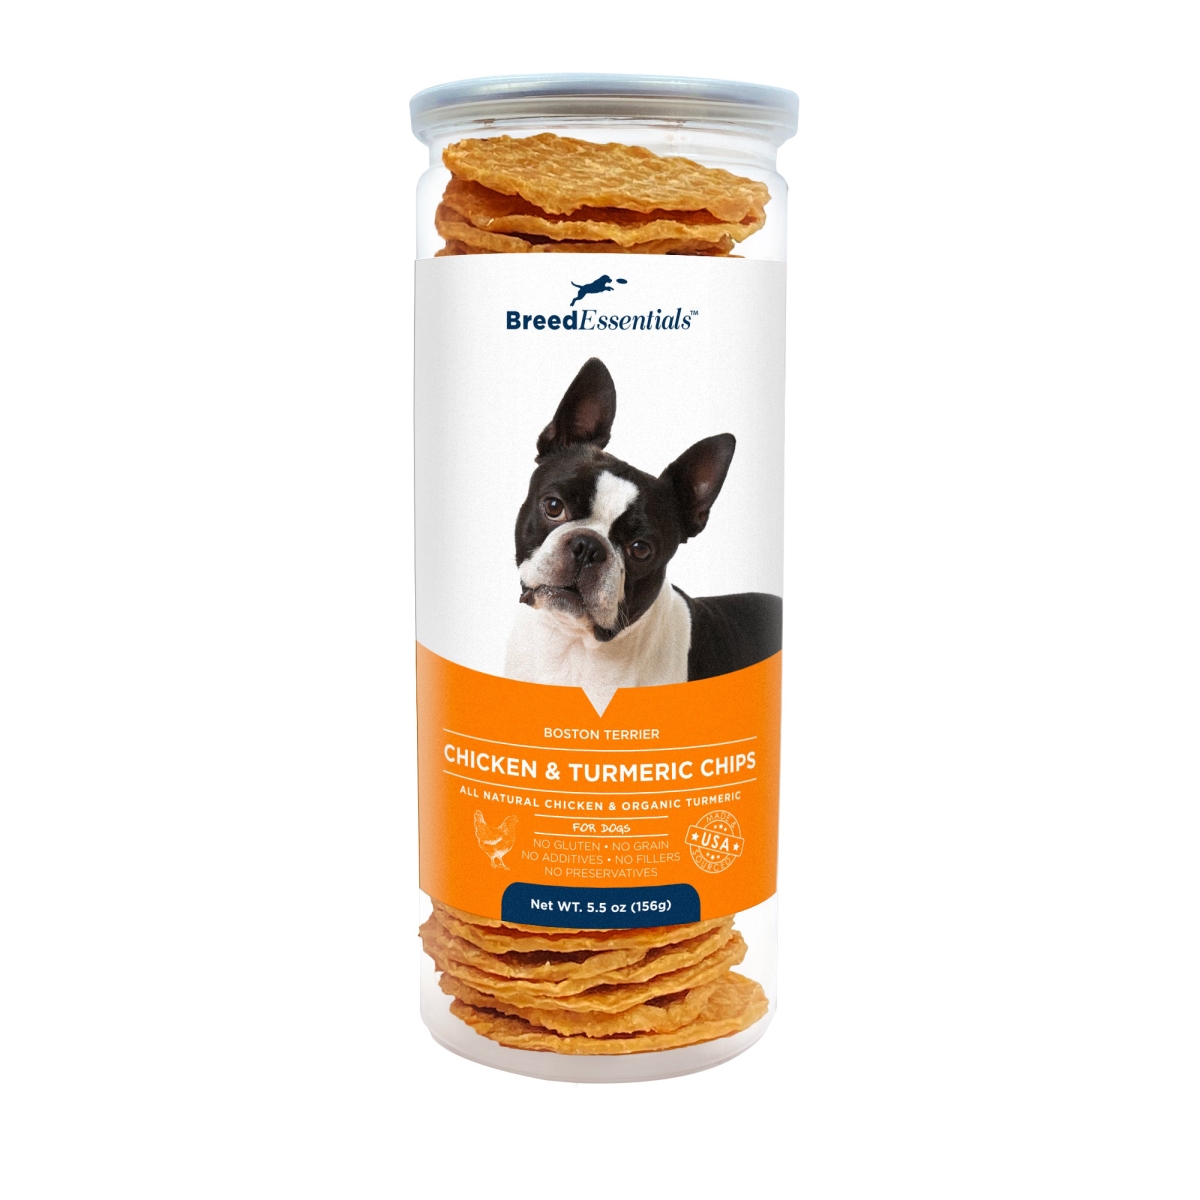 Picture of Breed Essentials 197247001546 5.5 oz Chicken & Turmeric Chips - Boston Terrier